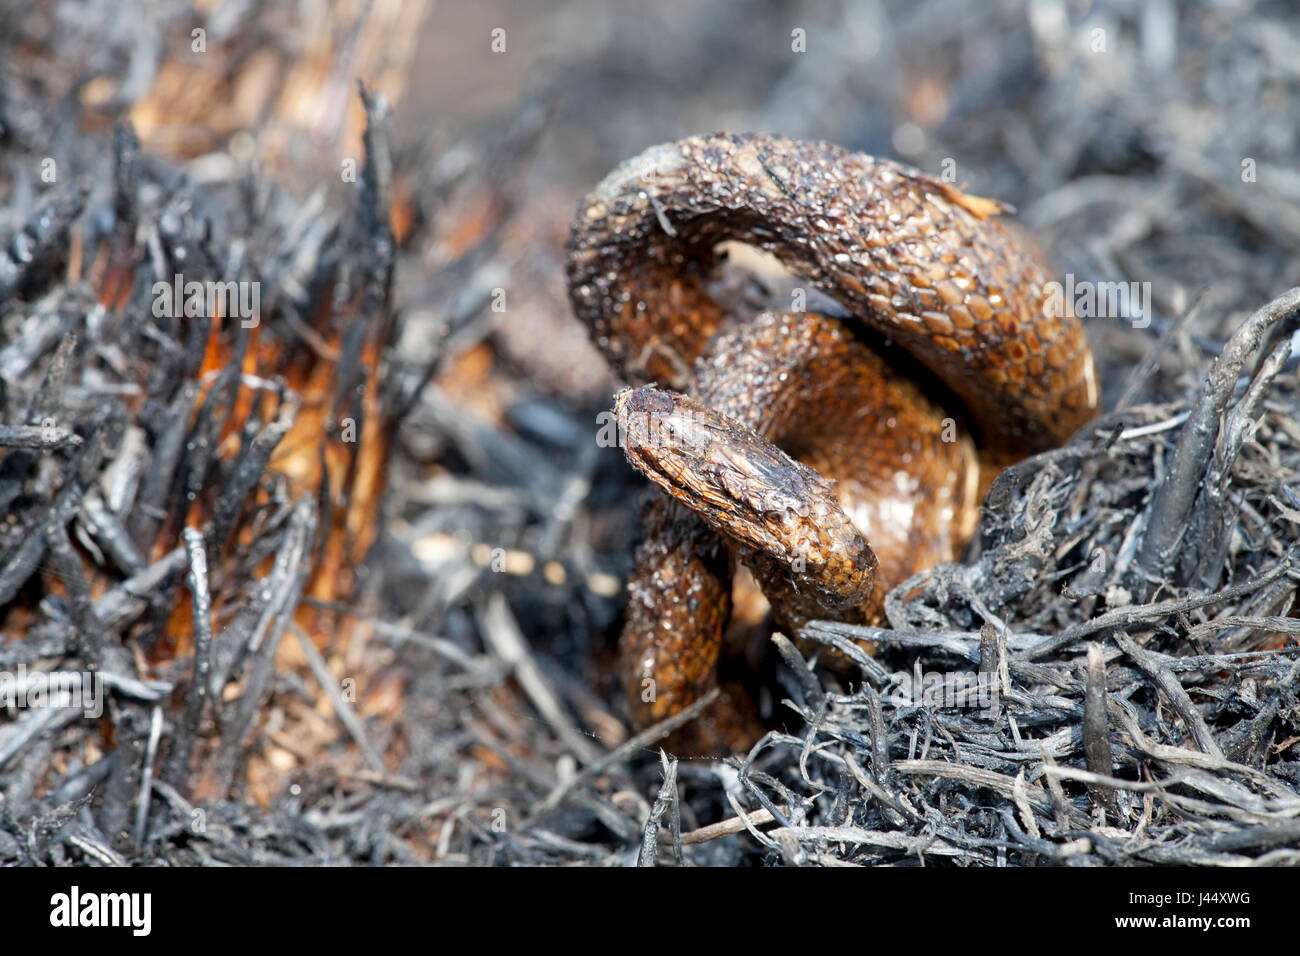 photo of a smooth snake killed by a heath fire Stock Photo